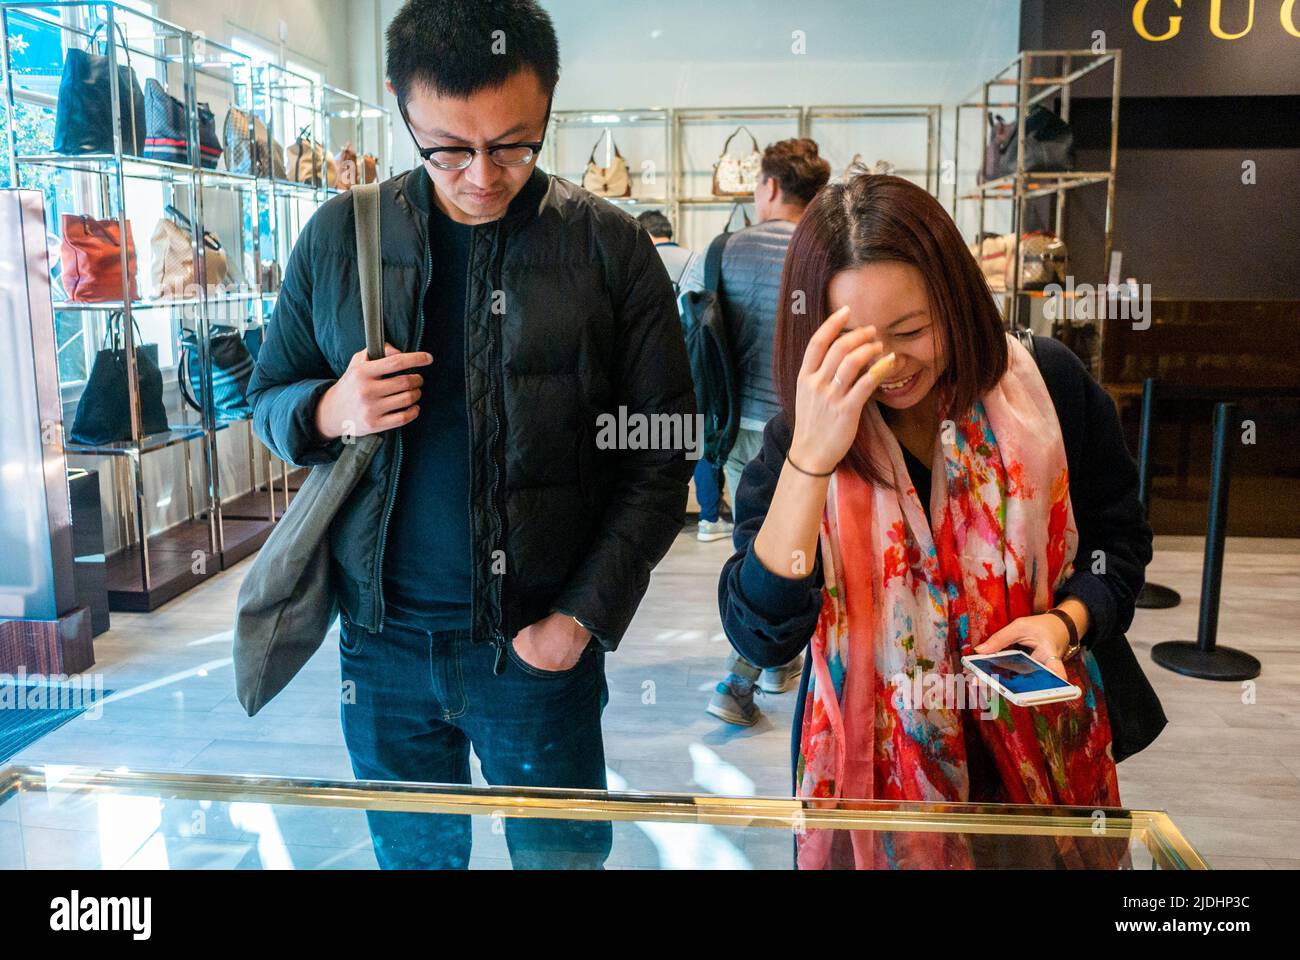 Marne-la-Vallée, France, Chinese Tourists Shopping in Discount Shopping Mall,  Vallée Village,, Gucci Brand Shop Stock Photo - Alamy